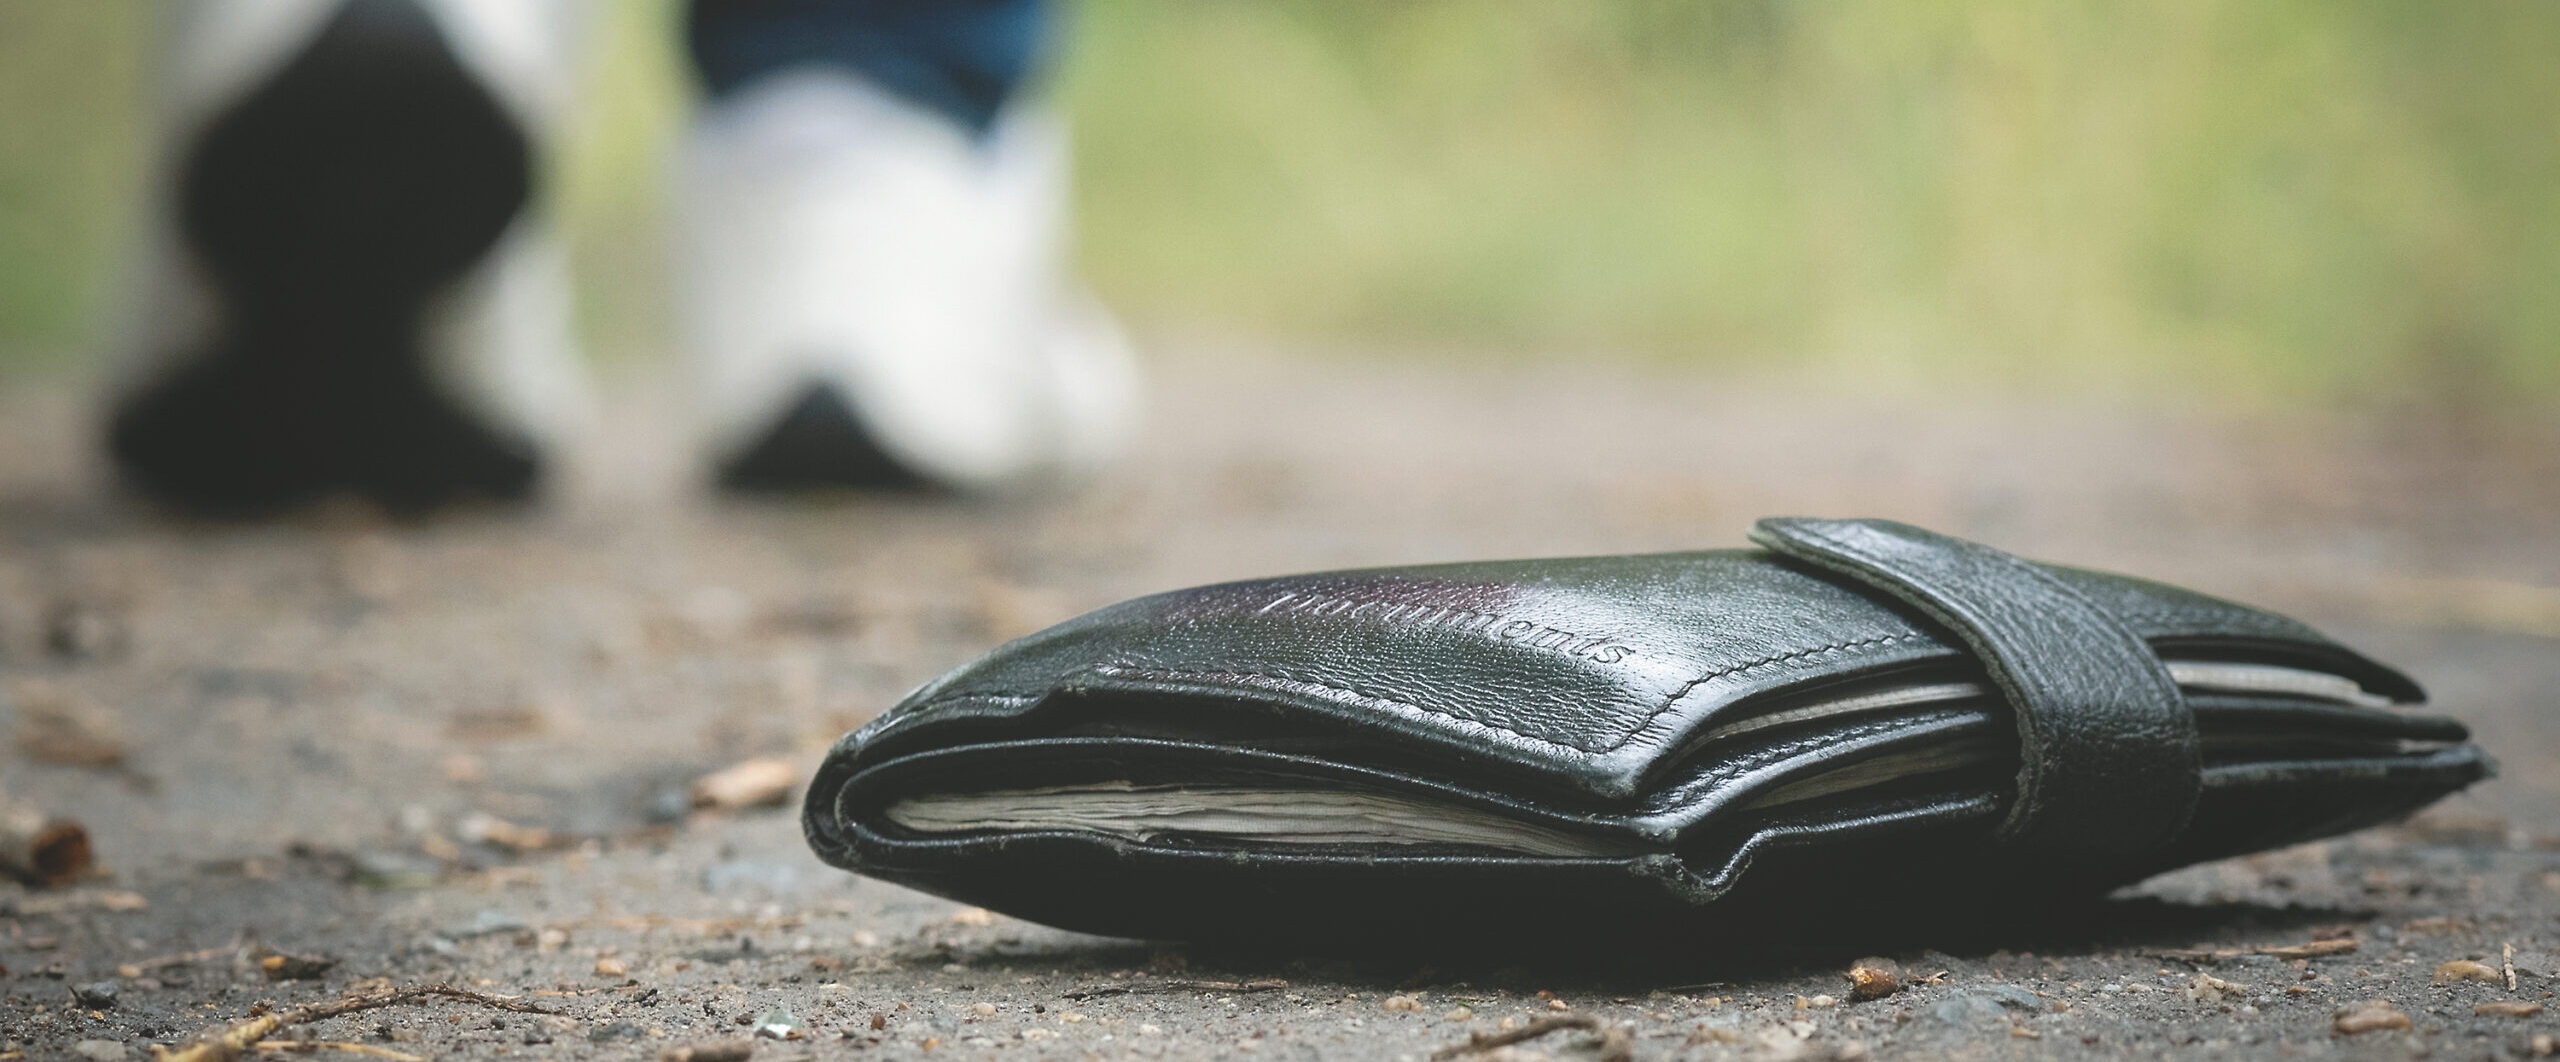 Lost Wallet? Take These 5 Steps Now NerdWallet Canada